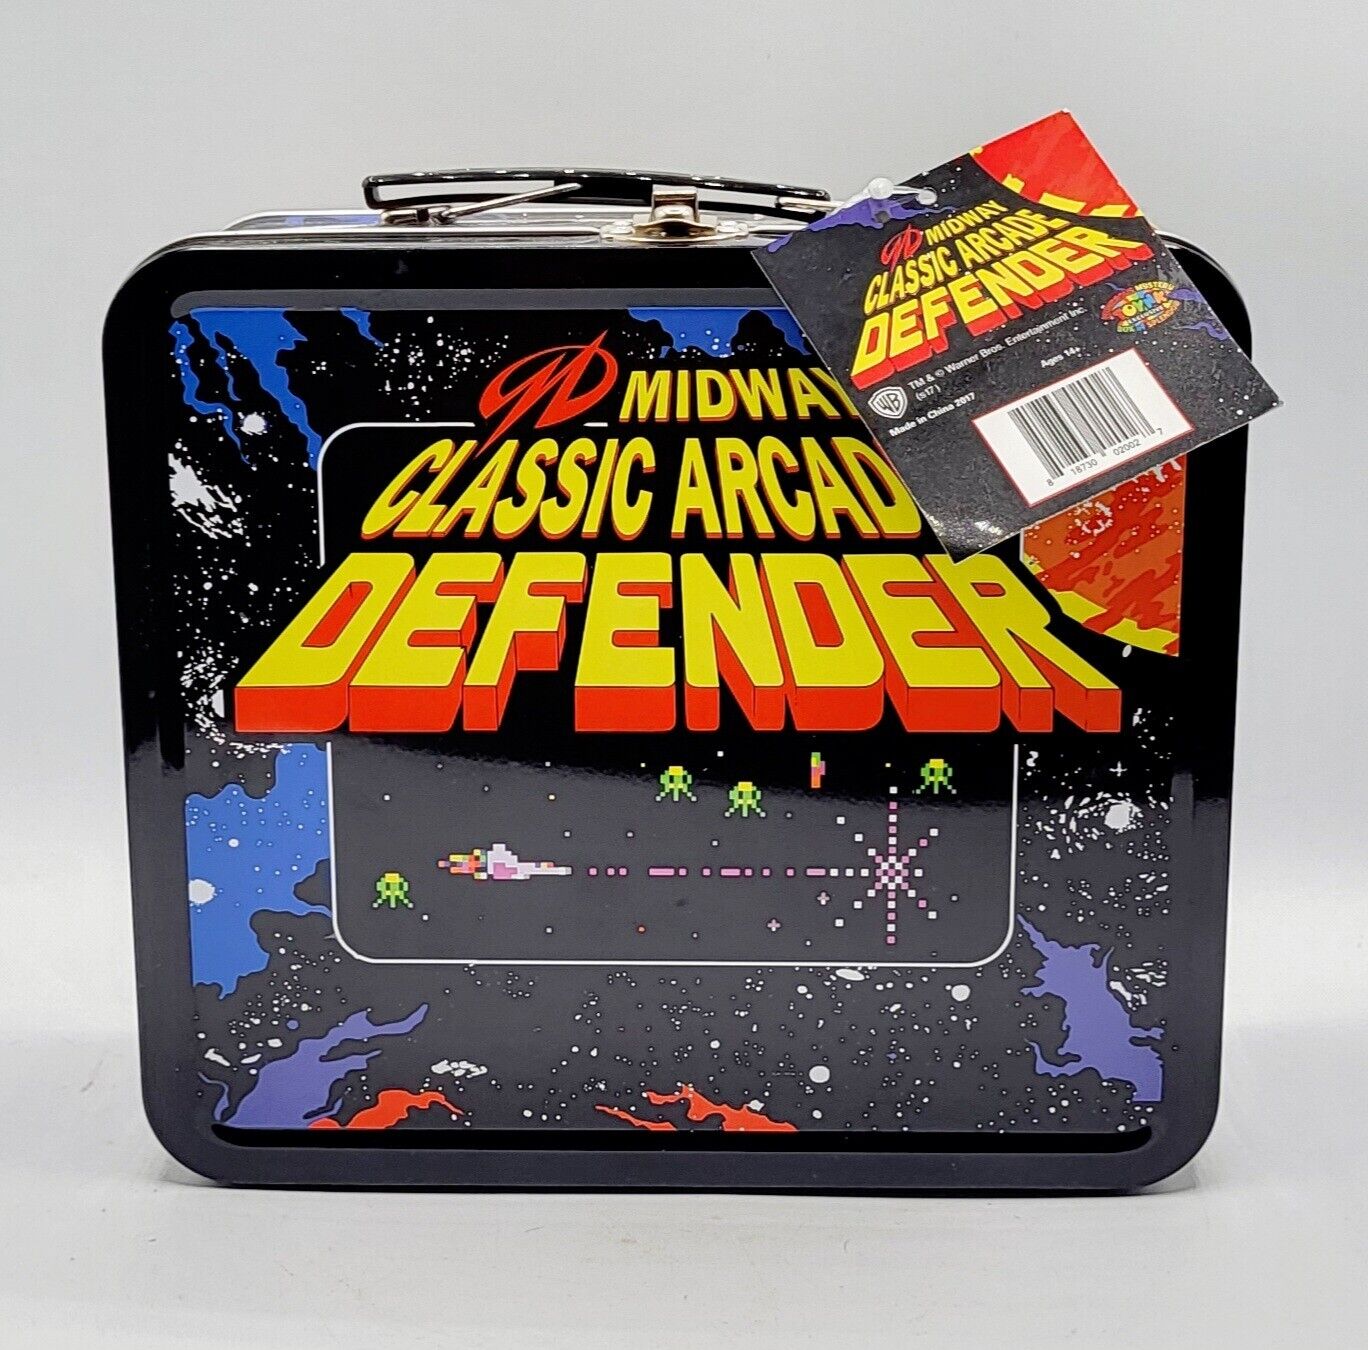 Midway Classic Arcade Defender Tin Lunch Box Toynk Exclusive 